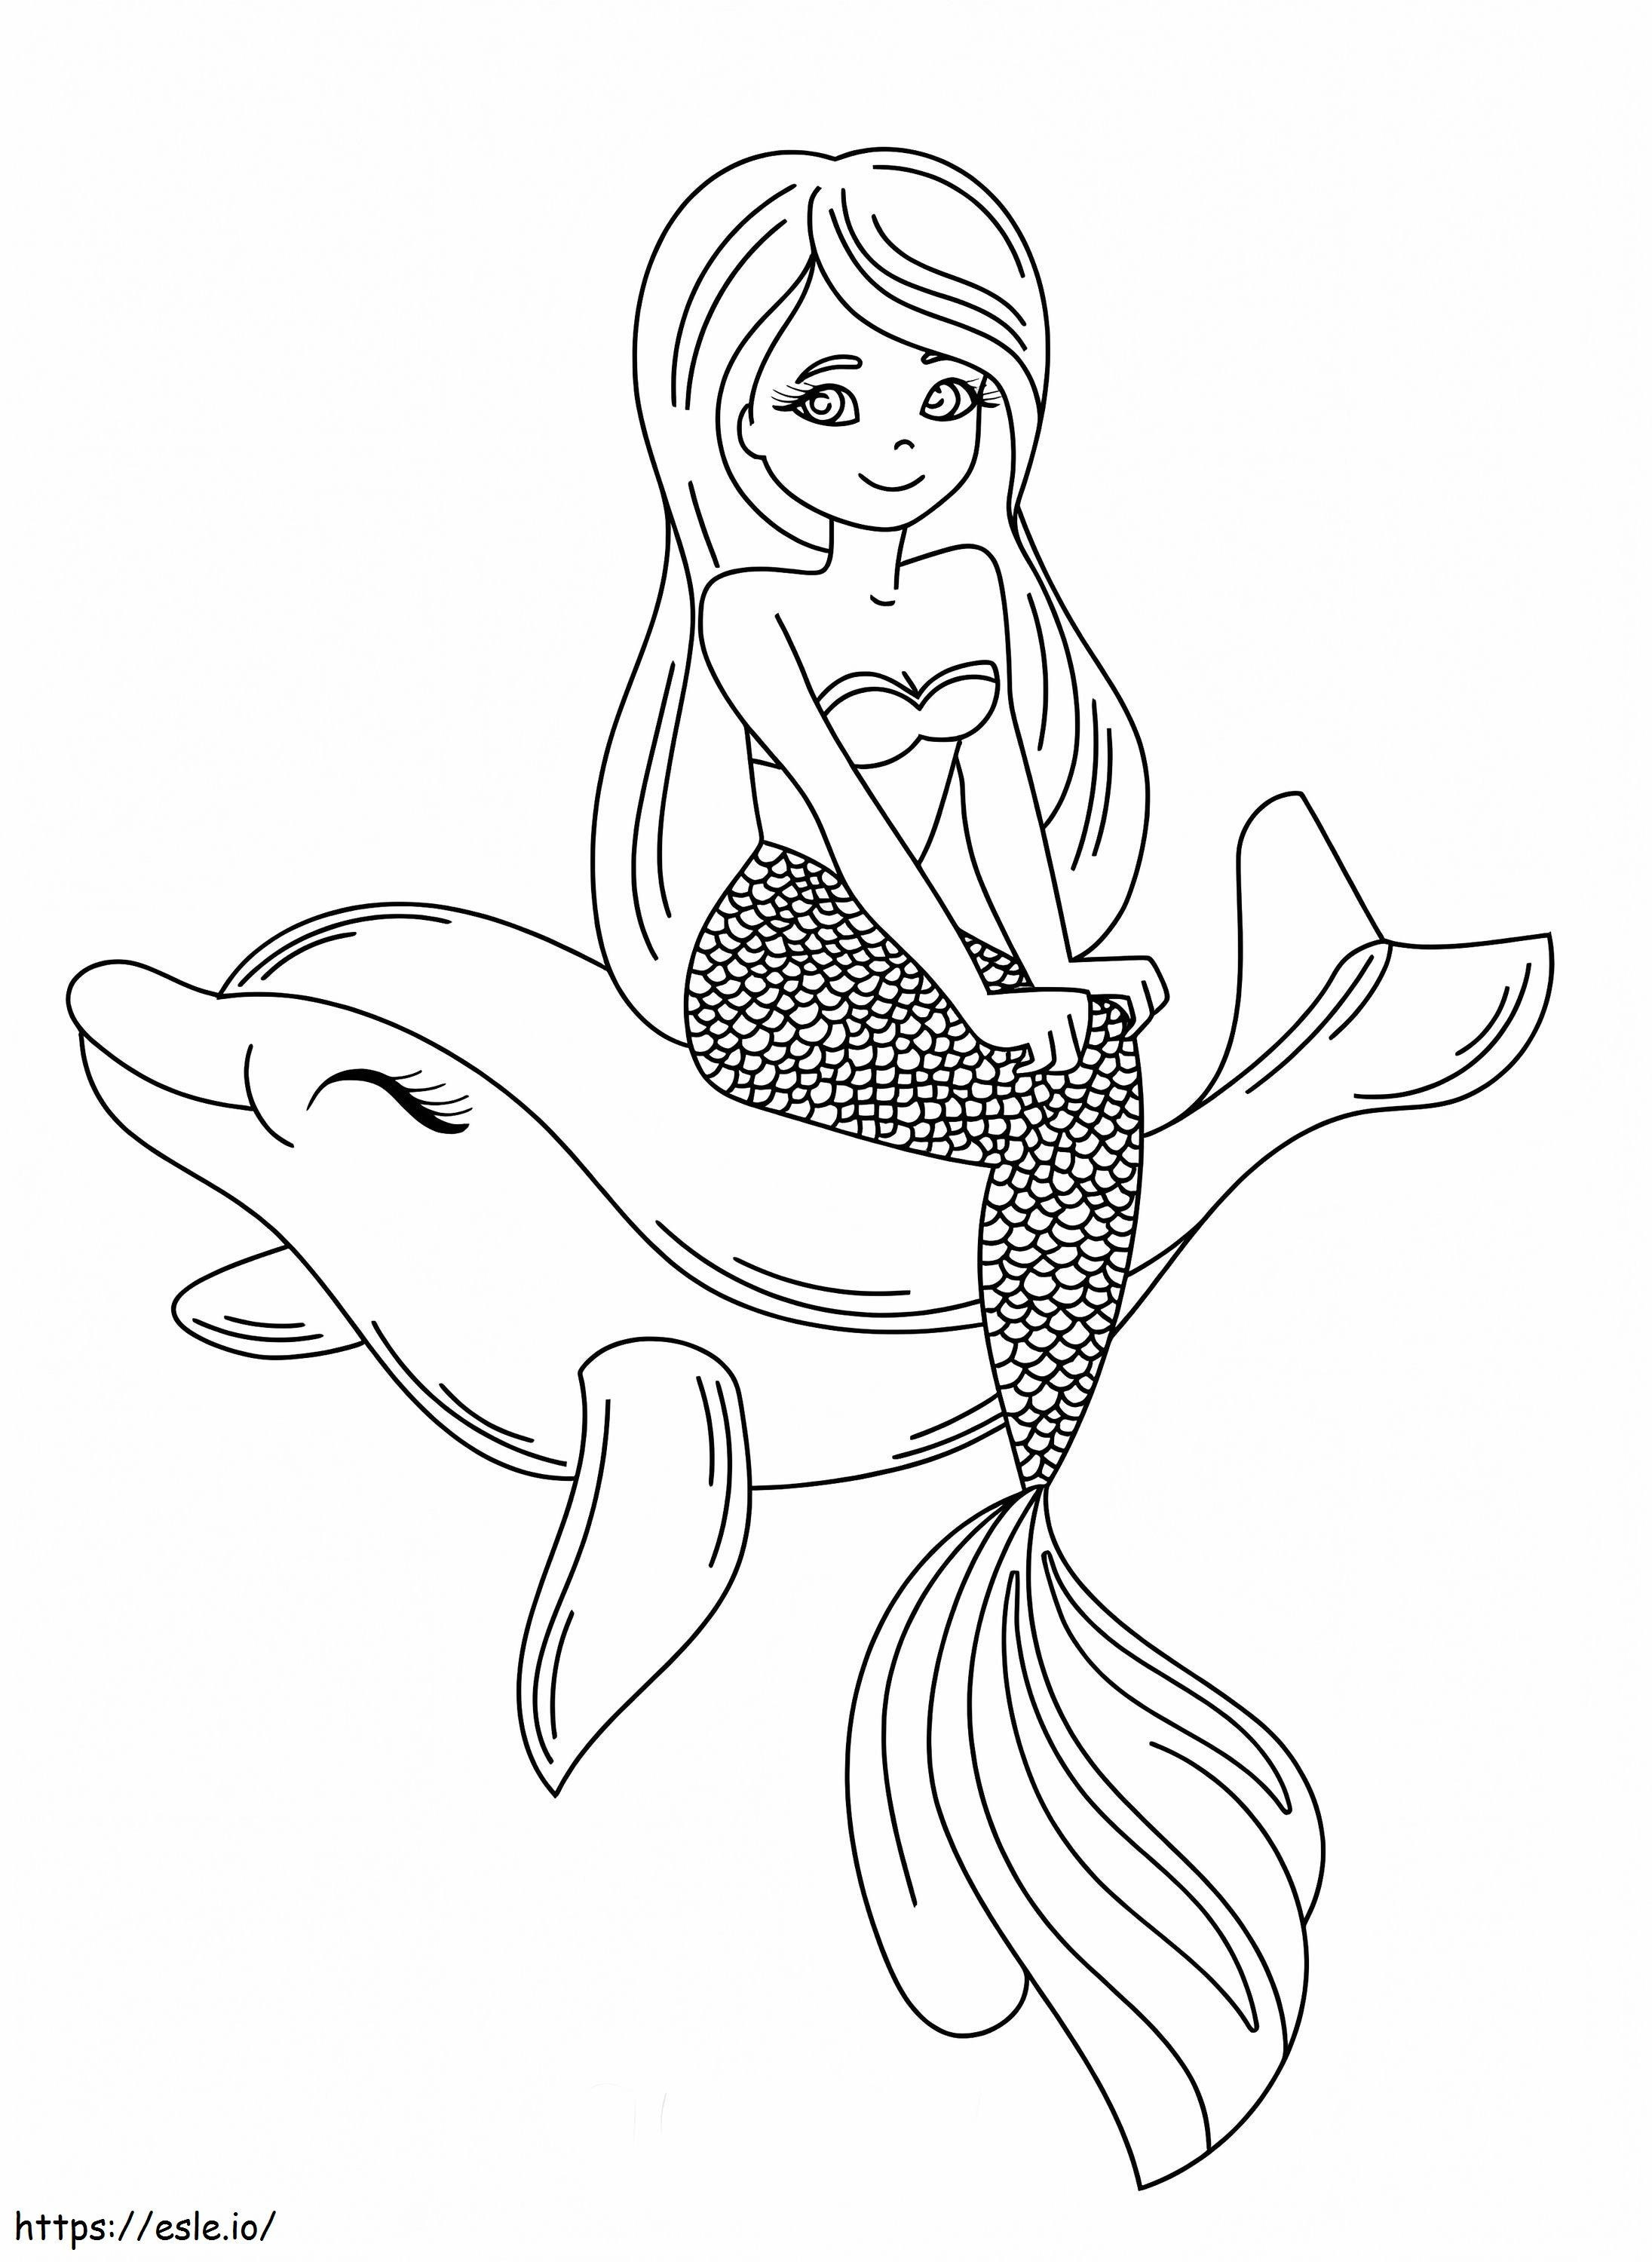 Mermaid Sitting On Dolphins coloring page